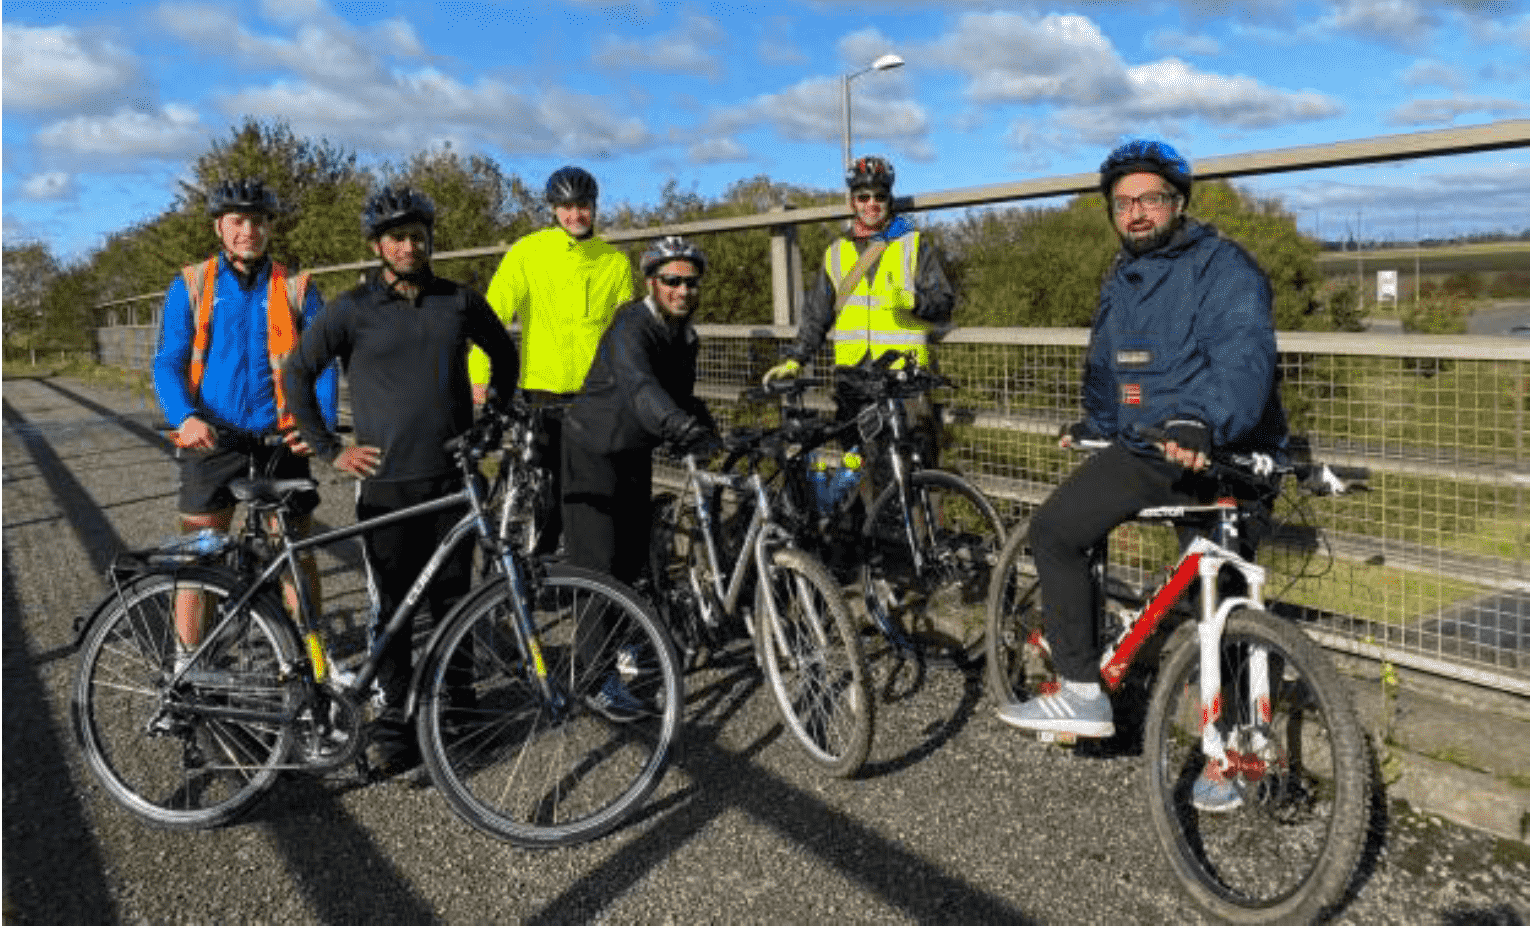 Group of cyclists from the project stopped on a bridge during group ride